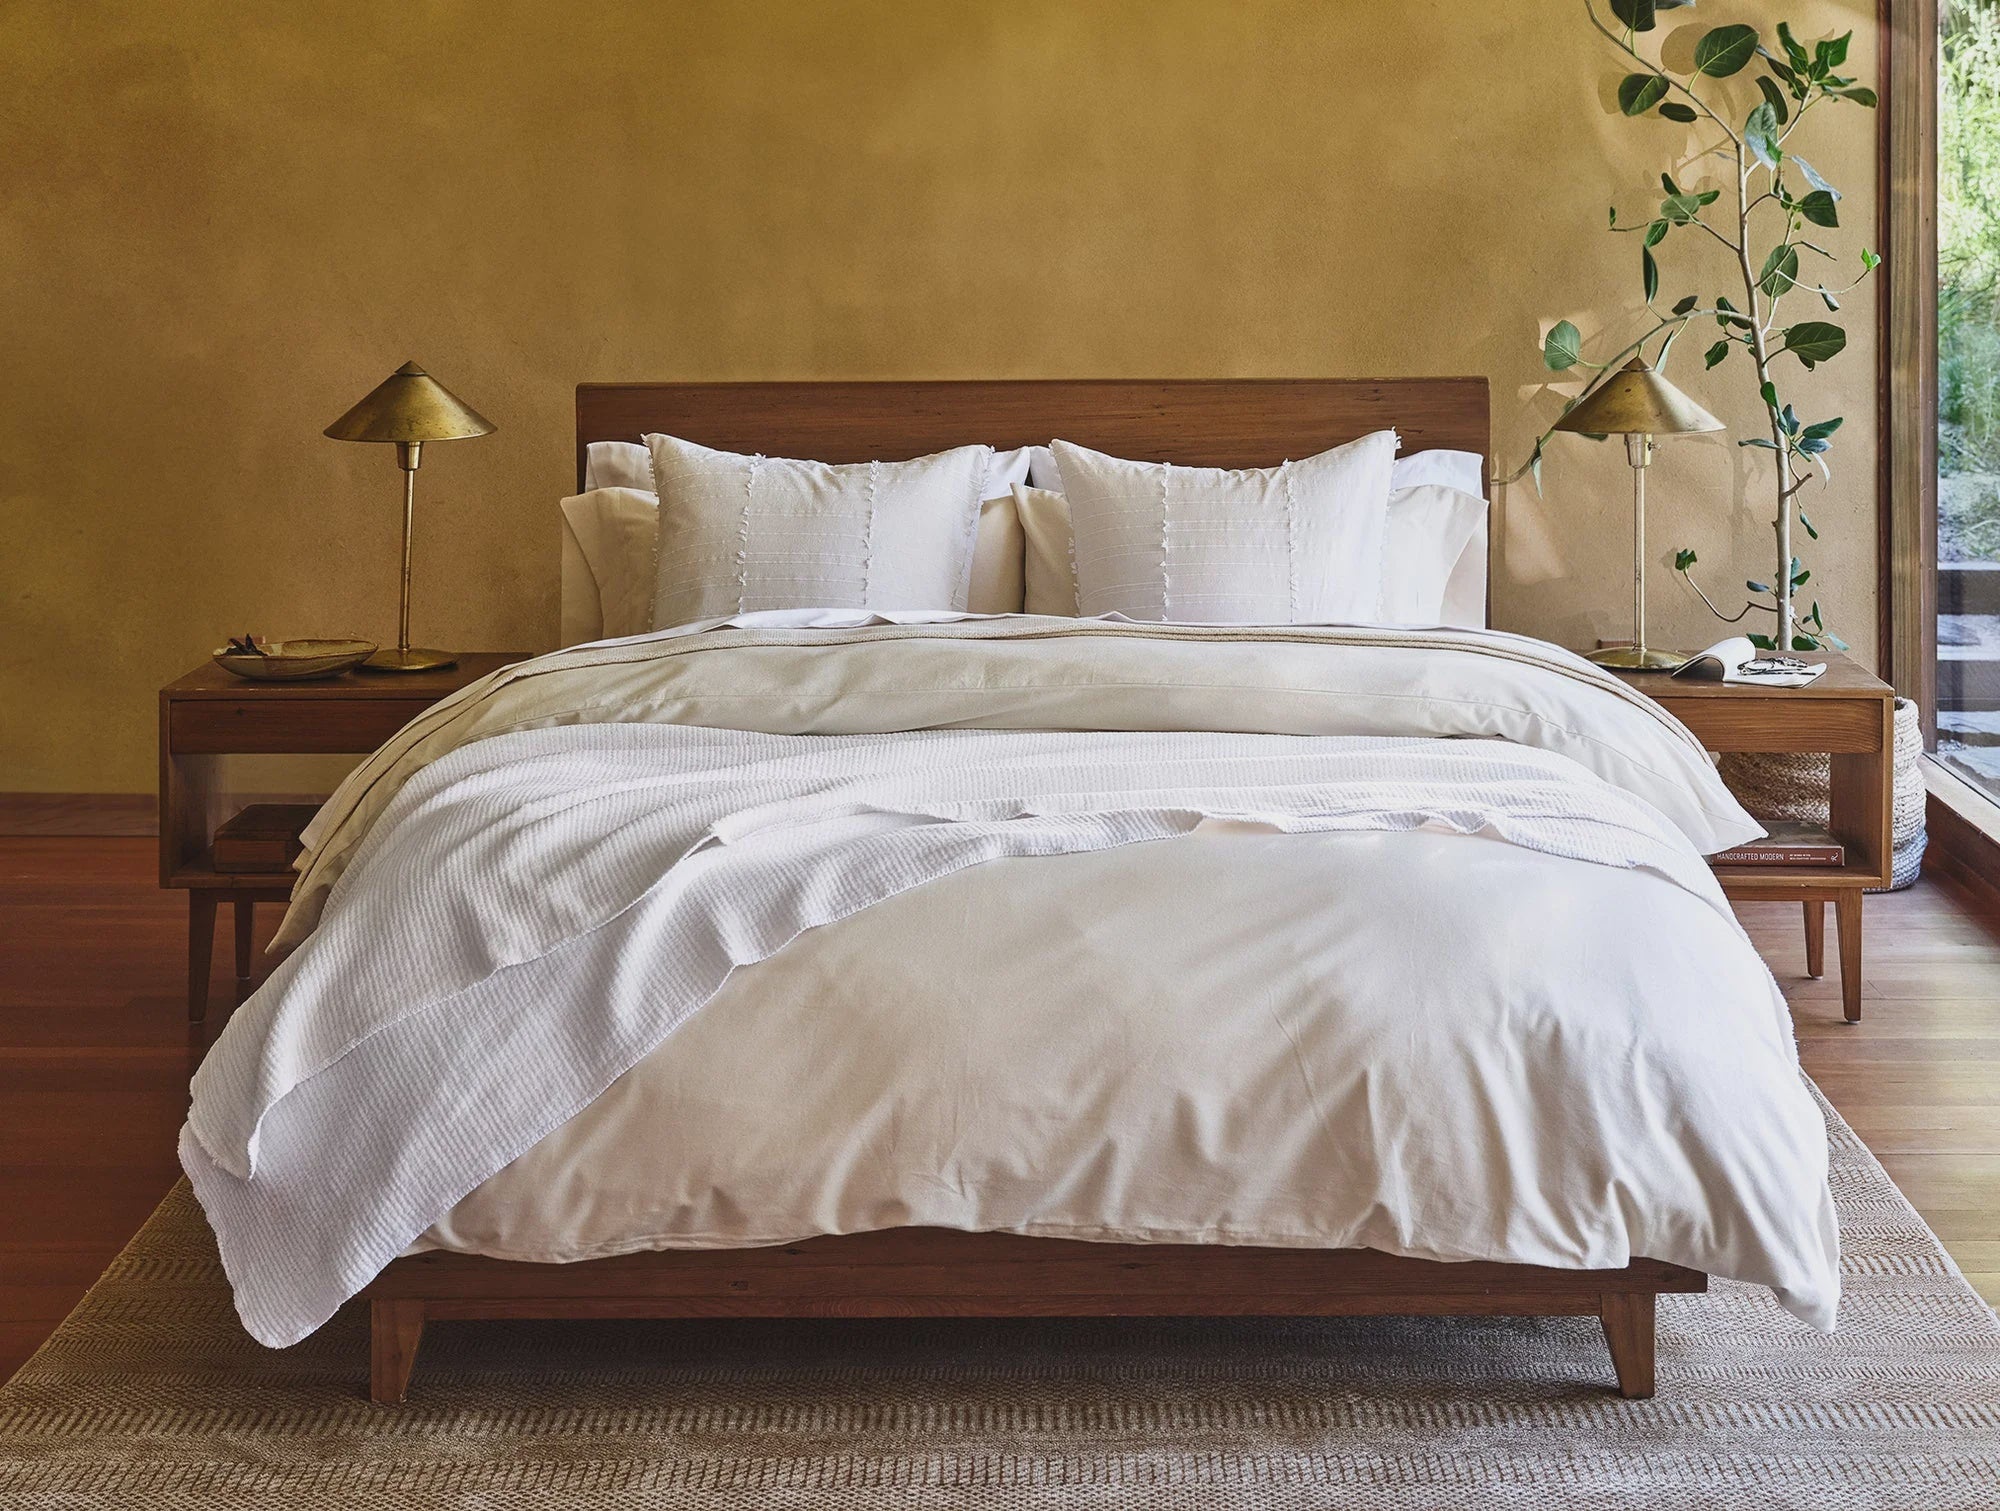 A neatly made bed with white Coyuchi Inc bedding and wooden frame in a serene bedroom with gold walls, side tables with lamps, and a potted plant in a Scottsdale Arizona bungalow.